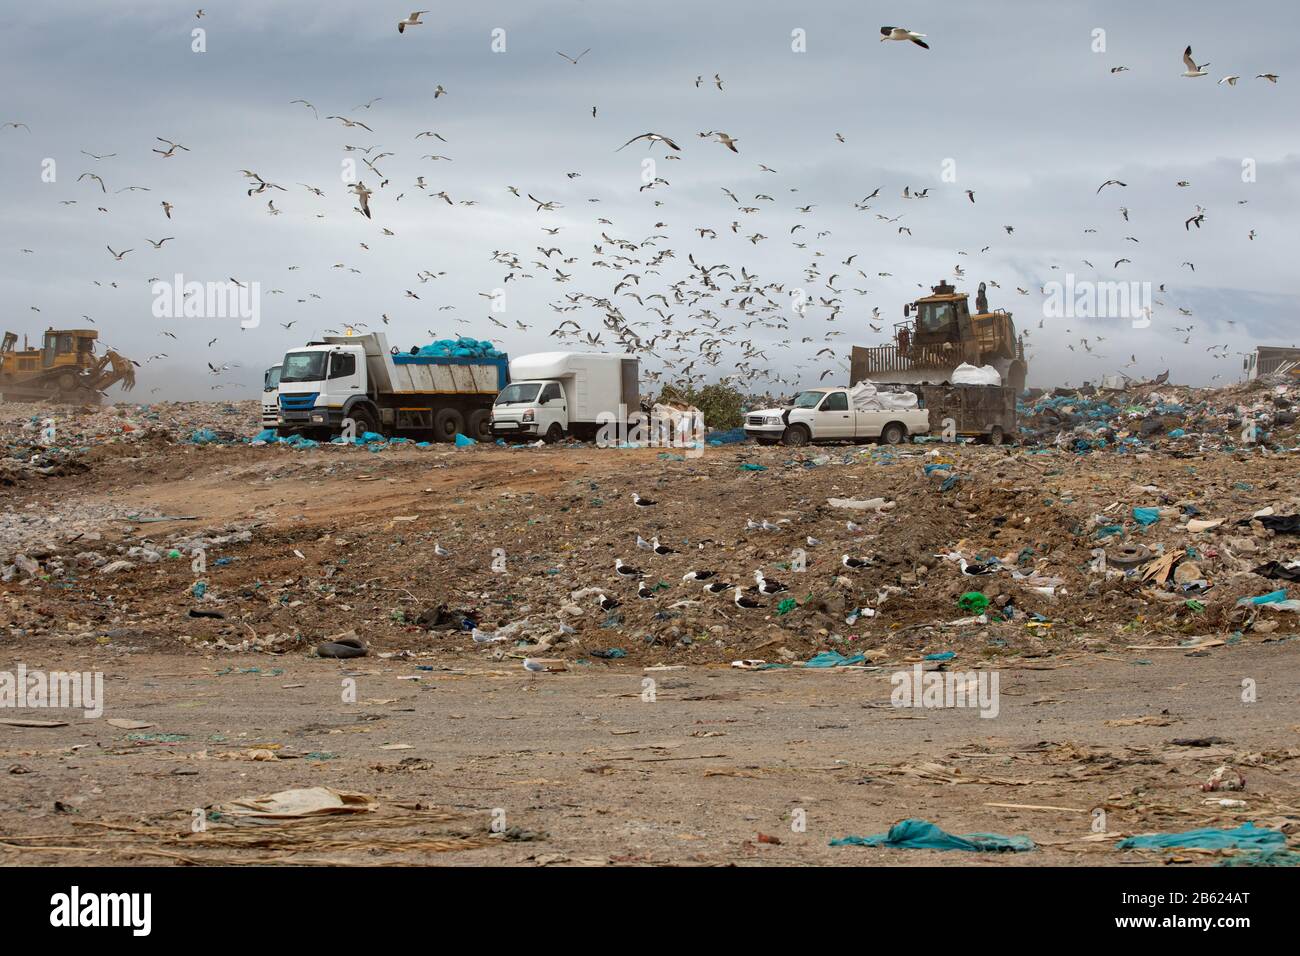 Rubbish piled on a landfill full of trash with vehicles working Stock Photo